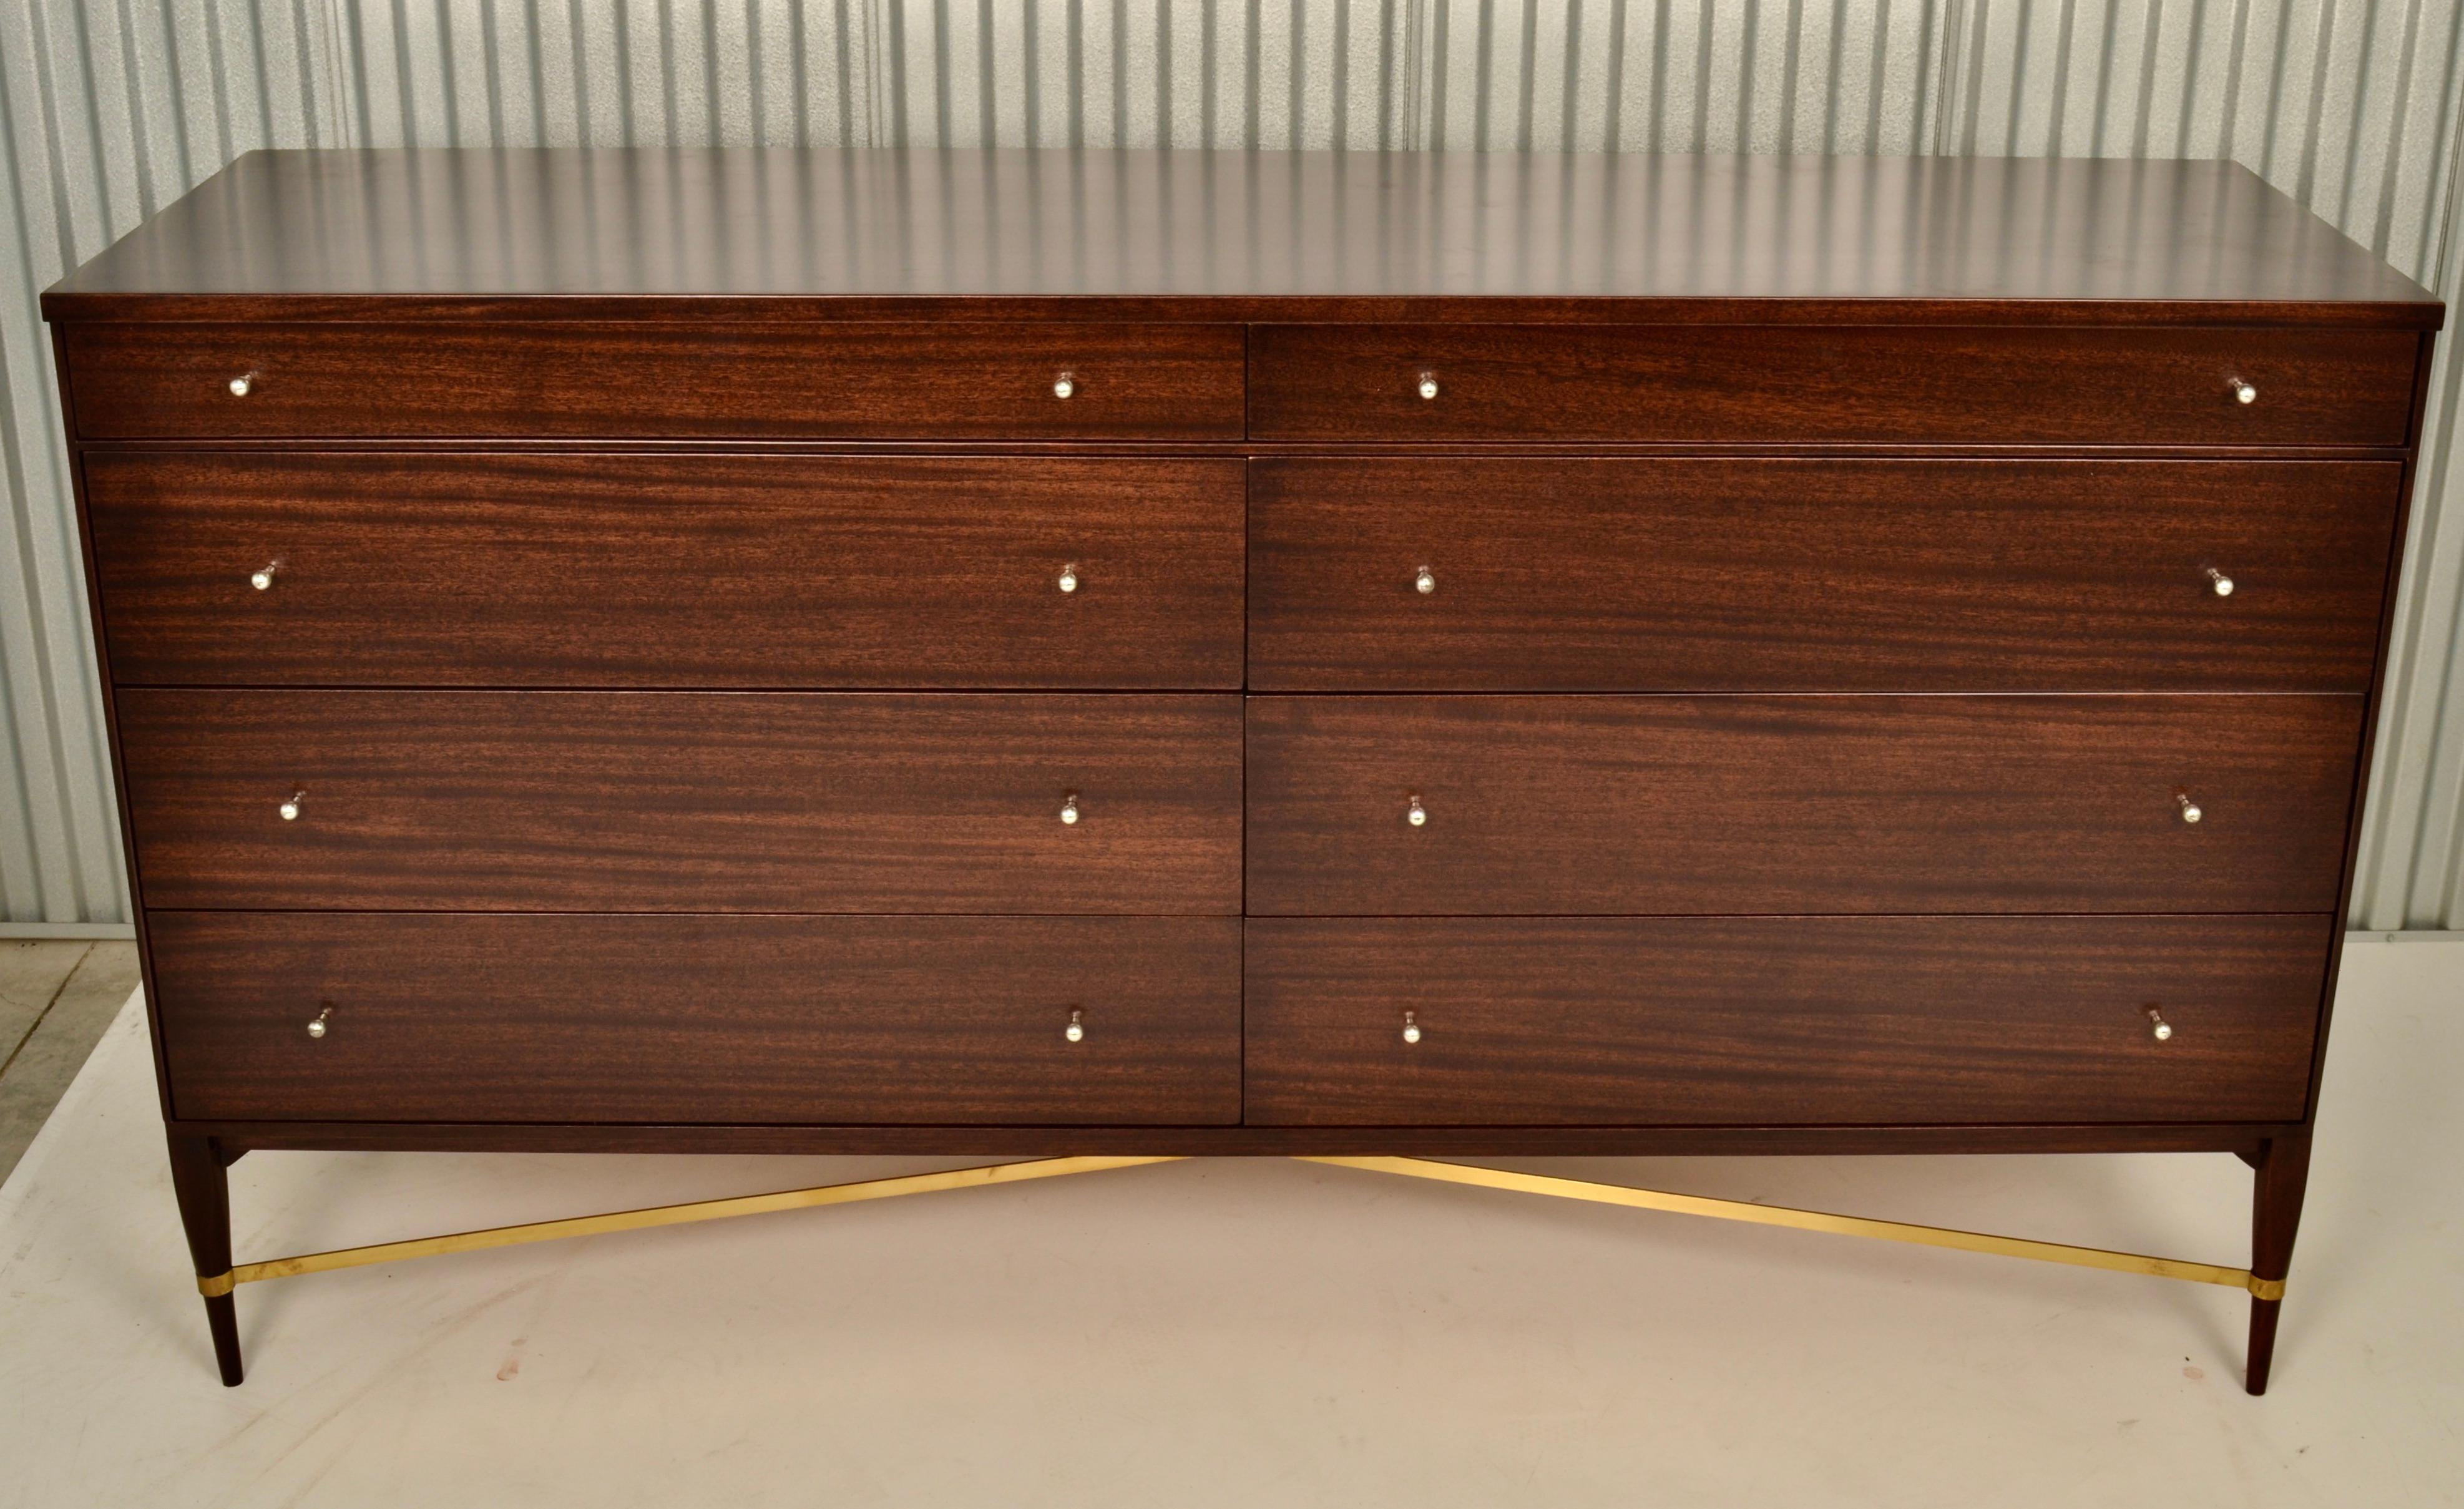 Featuring signature brass cross stretcher, this McCobb chest has been fully restored in a rich dark walnut stain with satin finish. Designed for Calvin Group circa 1950s. Original hardware. Very fine condition.